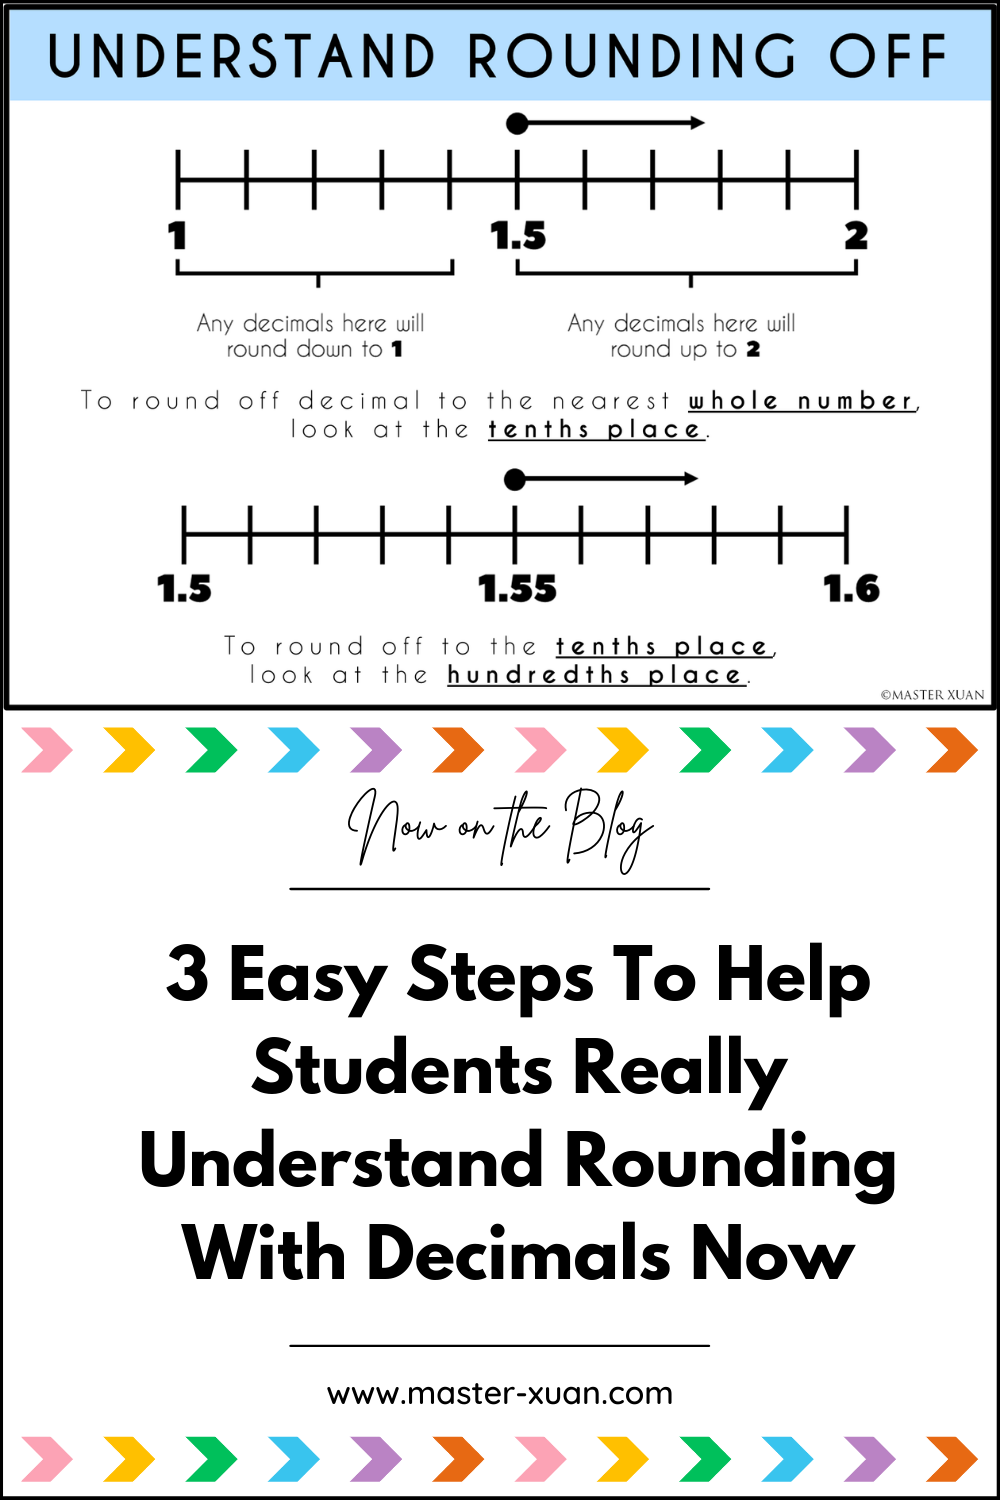 3 easy steps to help students really understand rounding with decimals now